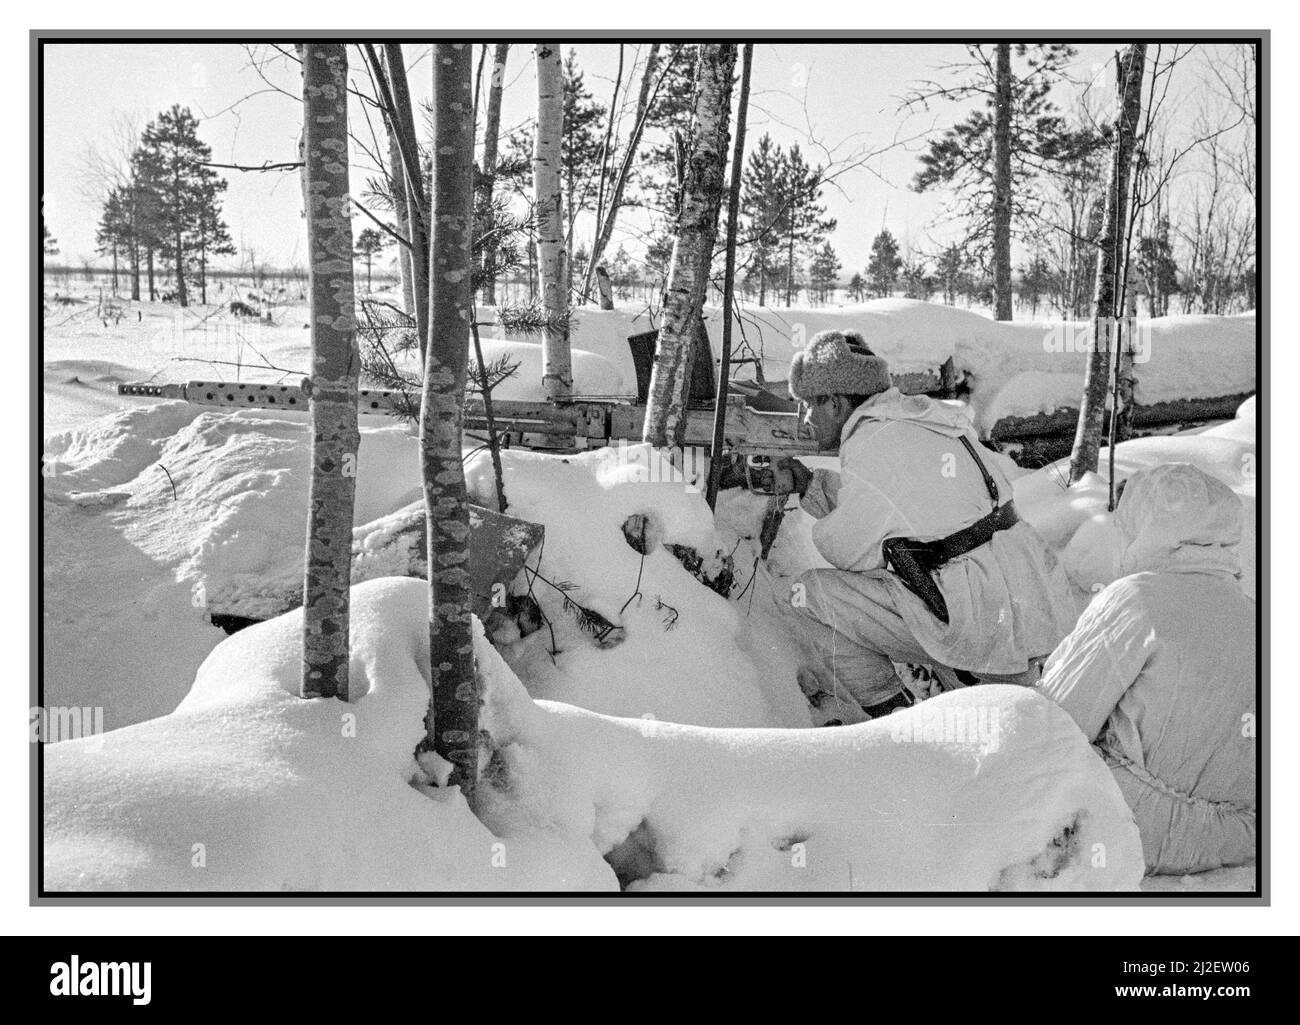 FINNISH FINLAND CONTINUATION WAR WINTER SNOW WW2 Finnish Lahti L-39 anti-tank gun being fired at a snow covered Russian dugout in the Stalin canal during the winter Finland Continuation War. The Soviets are returning fire with machine guns.  Date 20 February 1942  Attribution: Military Museum of Finland Stock Photo